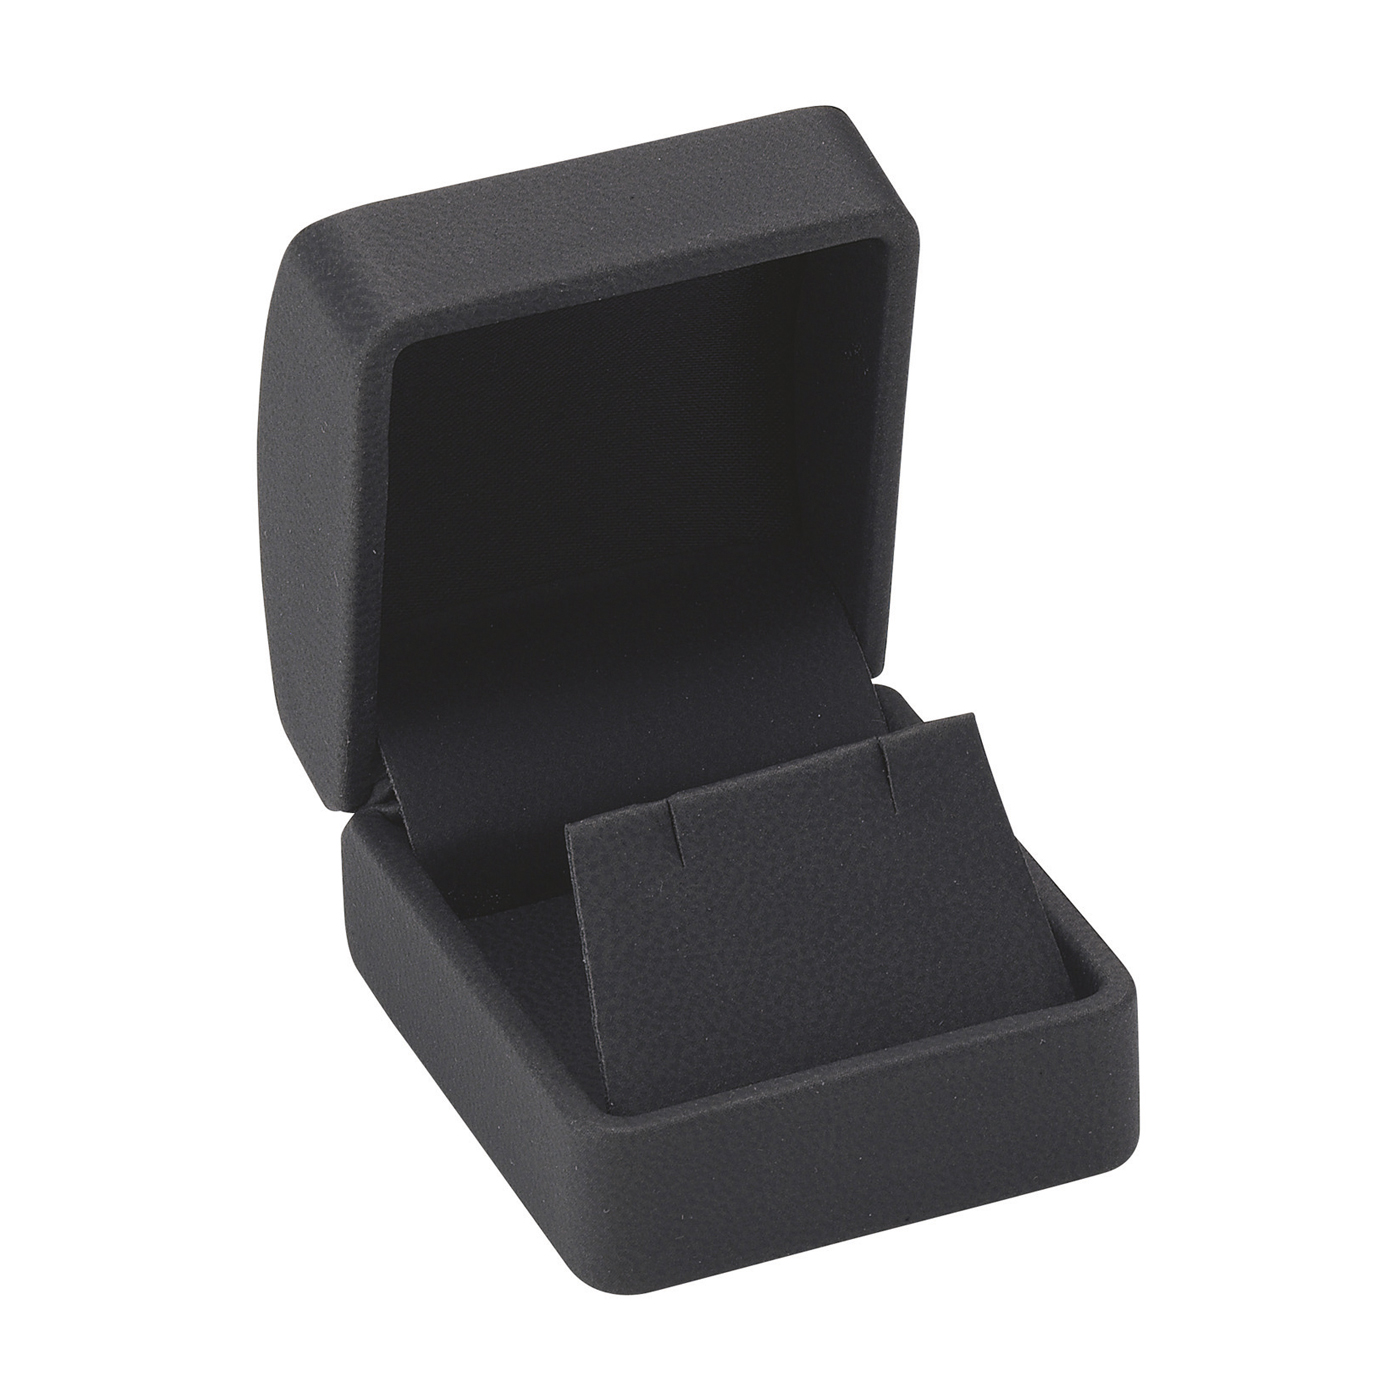 Jewellery Packaging "Soft Touch", Black, 54 x 58 x 21 mm - 1 piece